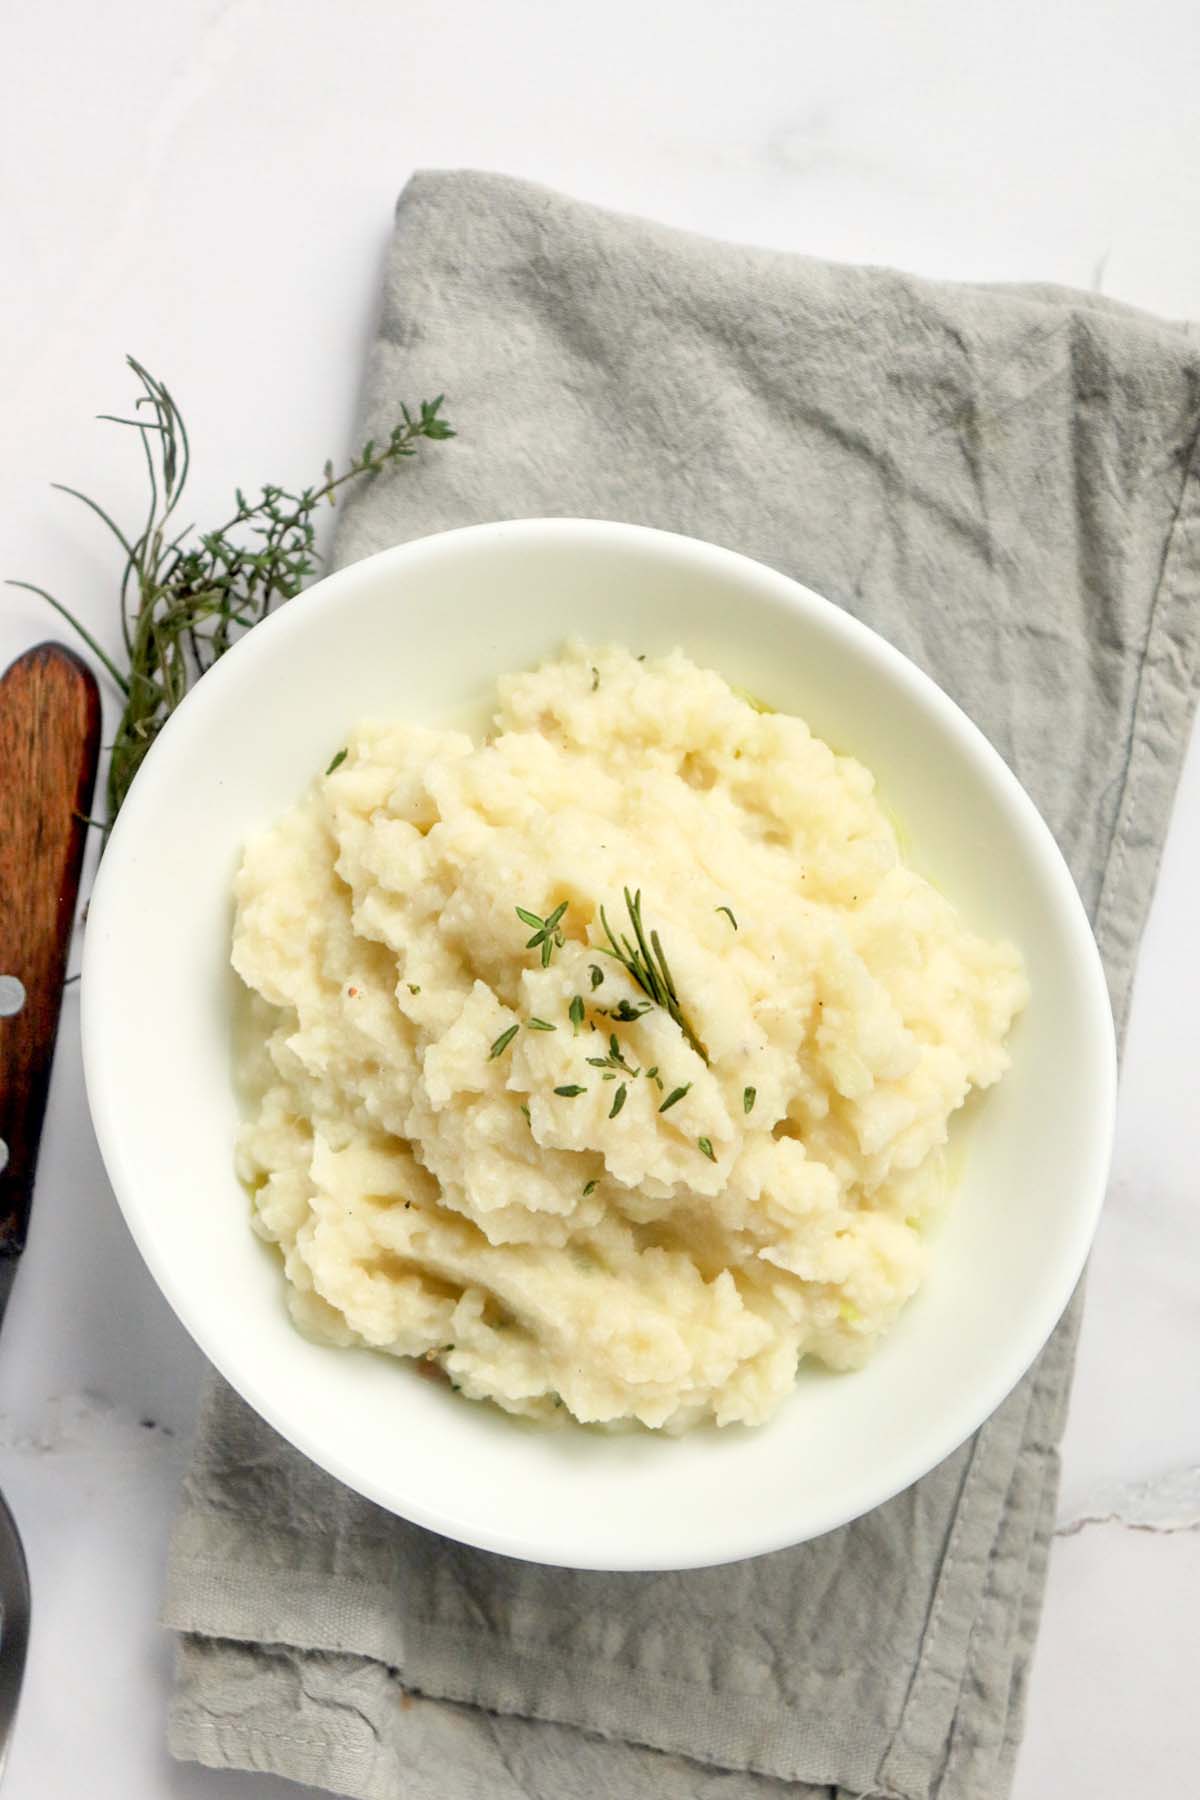 Mashed cauliflower in a bowl topped with dried parsley.